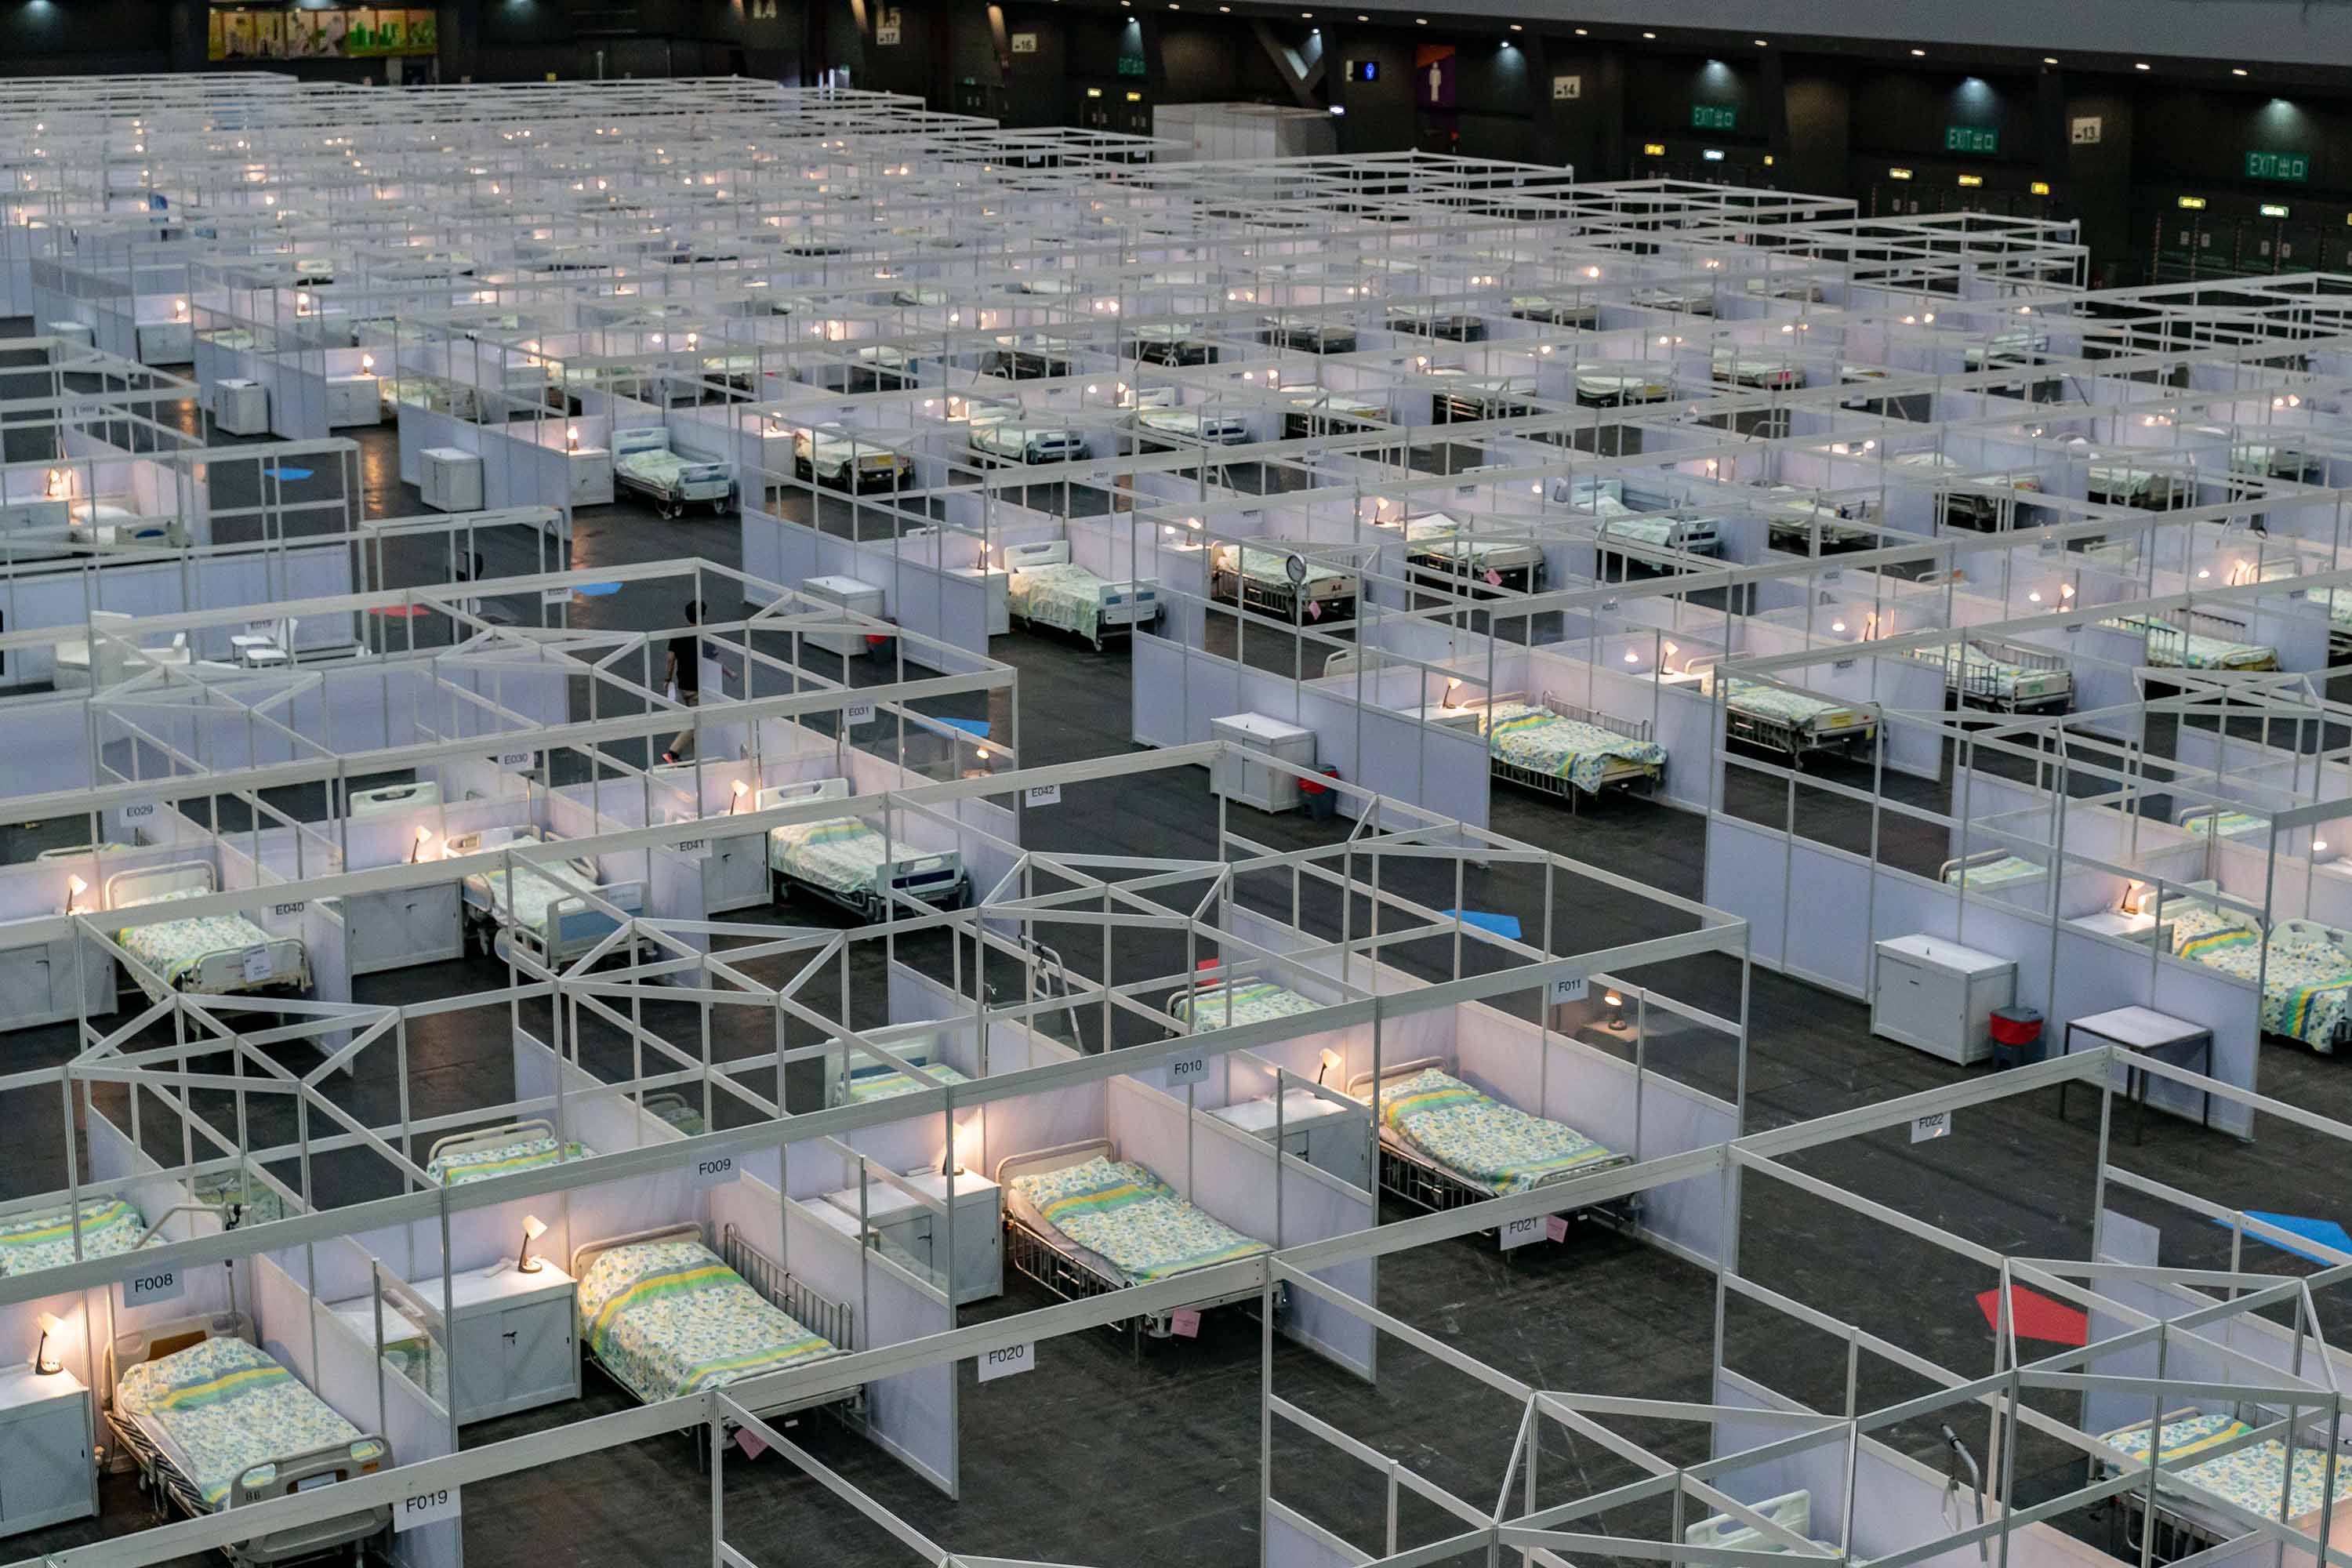 Beds are seen at a temporary field hospital set up at Asia World Expo in Hong Kong on August 1.